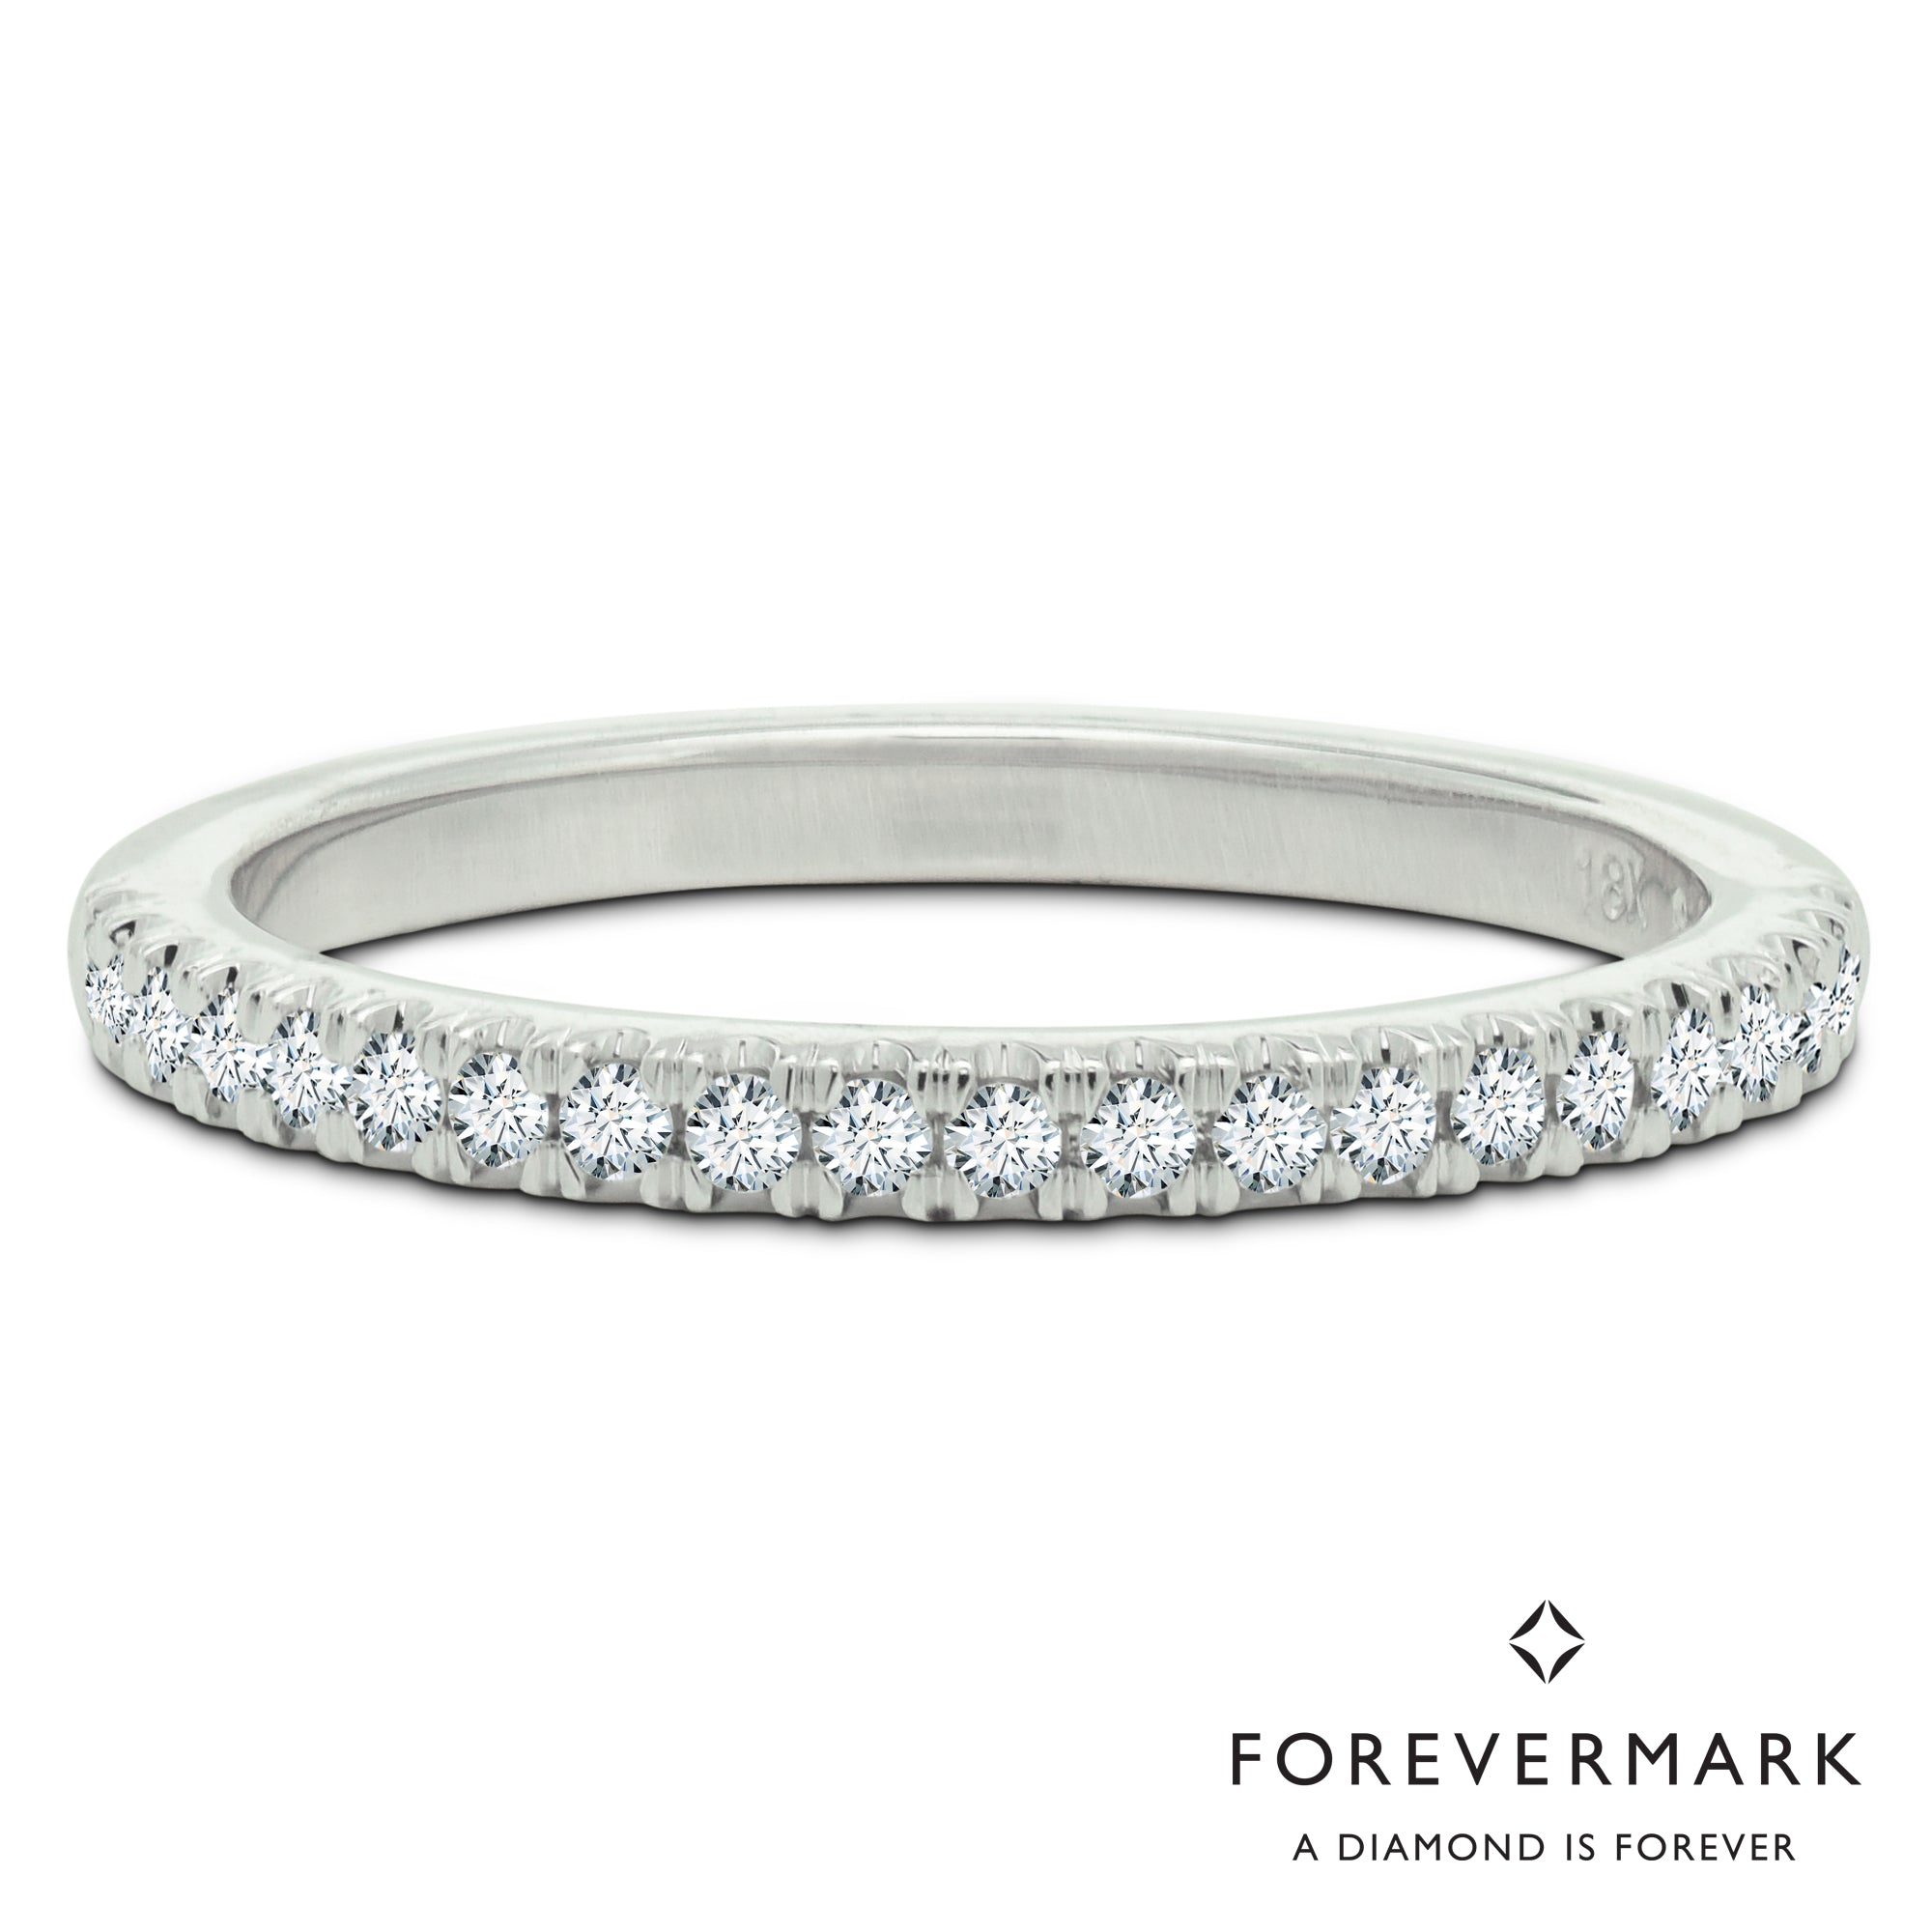 De Beers Forevermark Petite Diamond Wedding Band in 18kt White Gold (1/5ct tw)